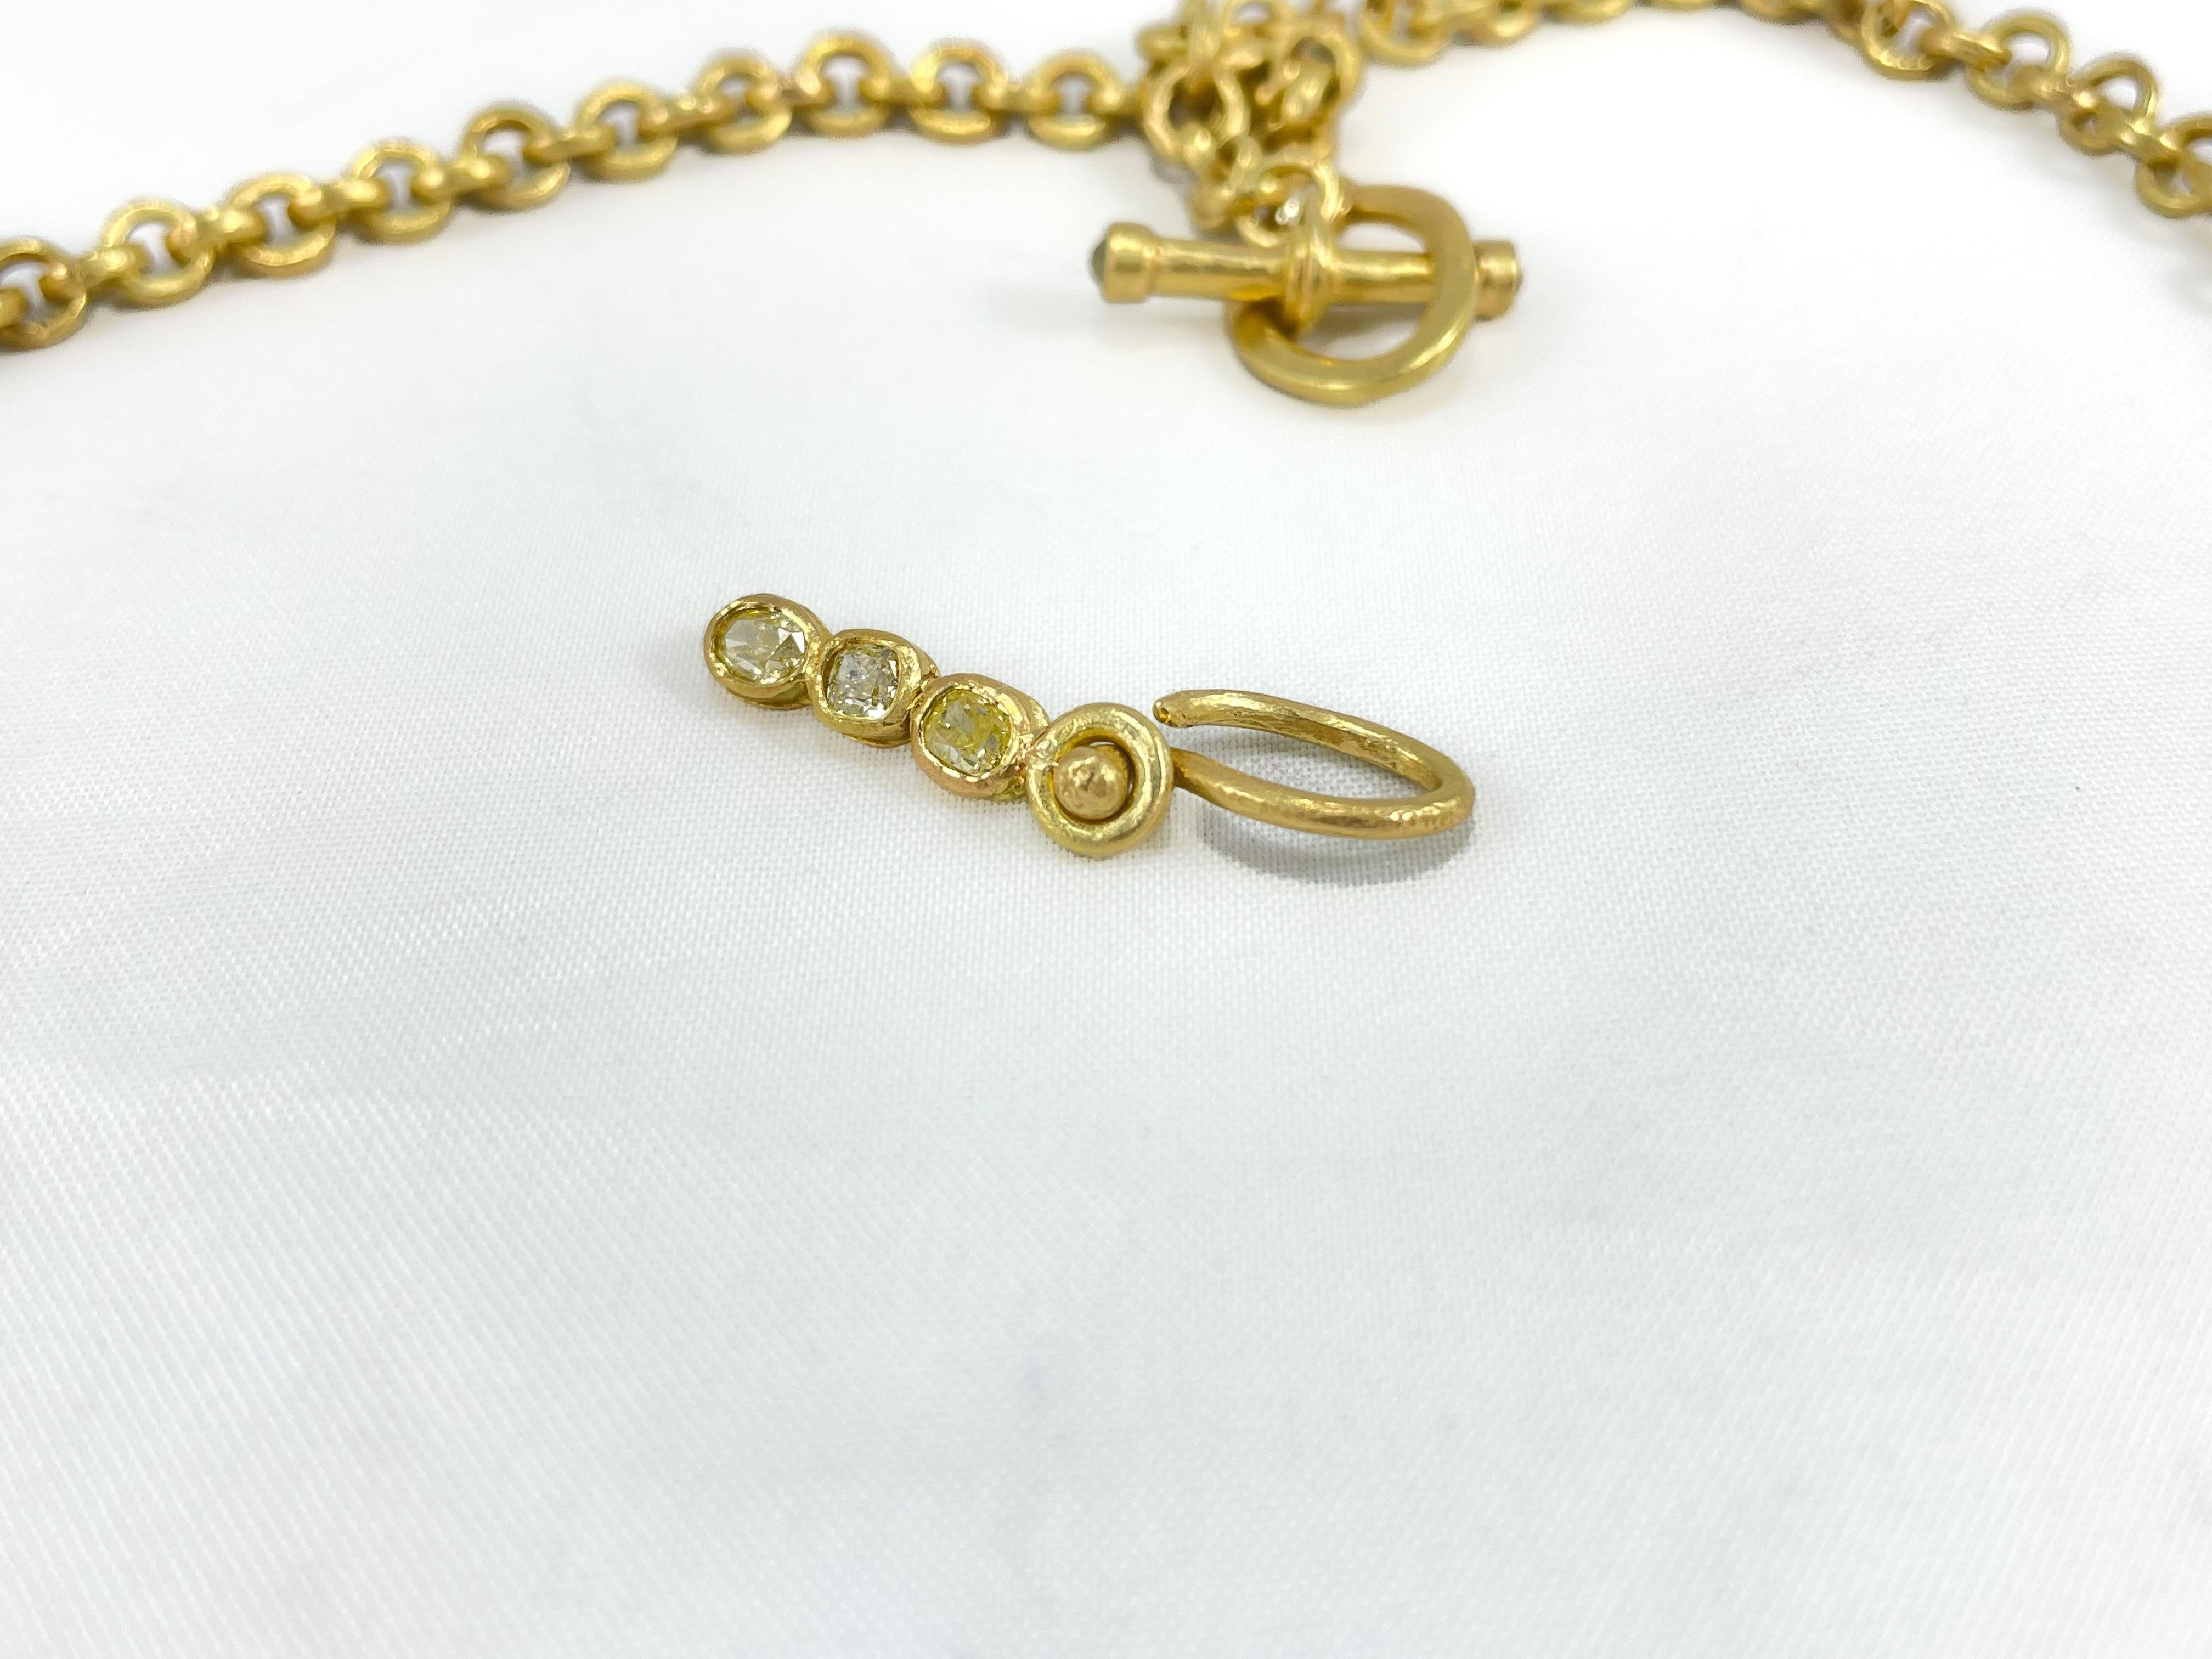 17mm Cream Pearl on 18K Gold Chain Necklace Diamond Enhancer and Toggle Clasp For Sale 2